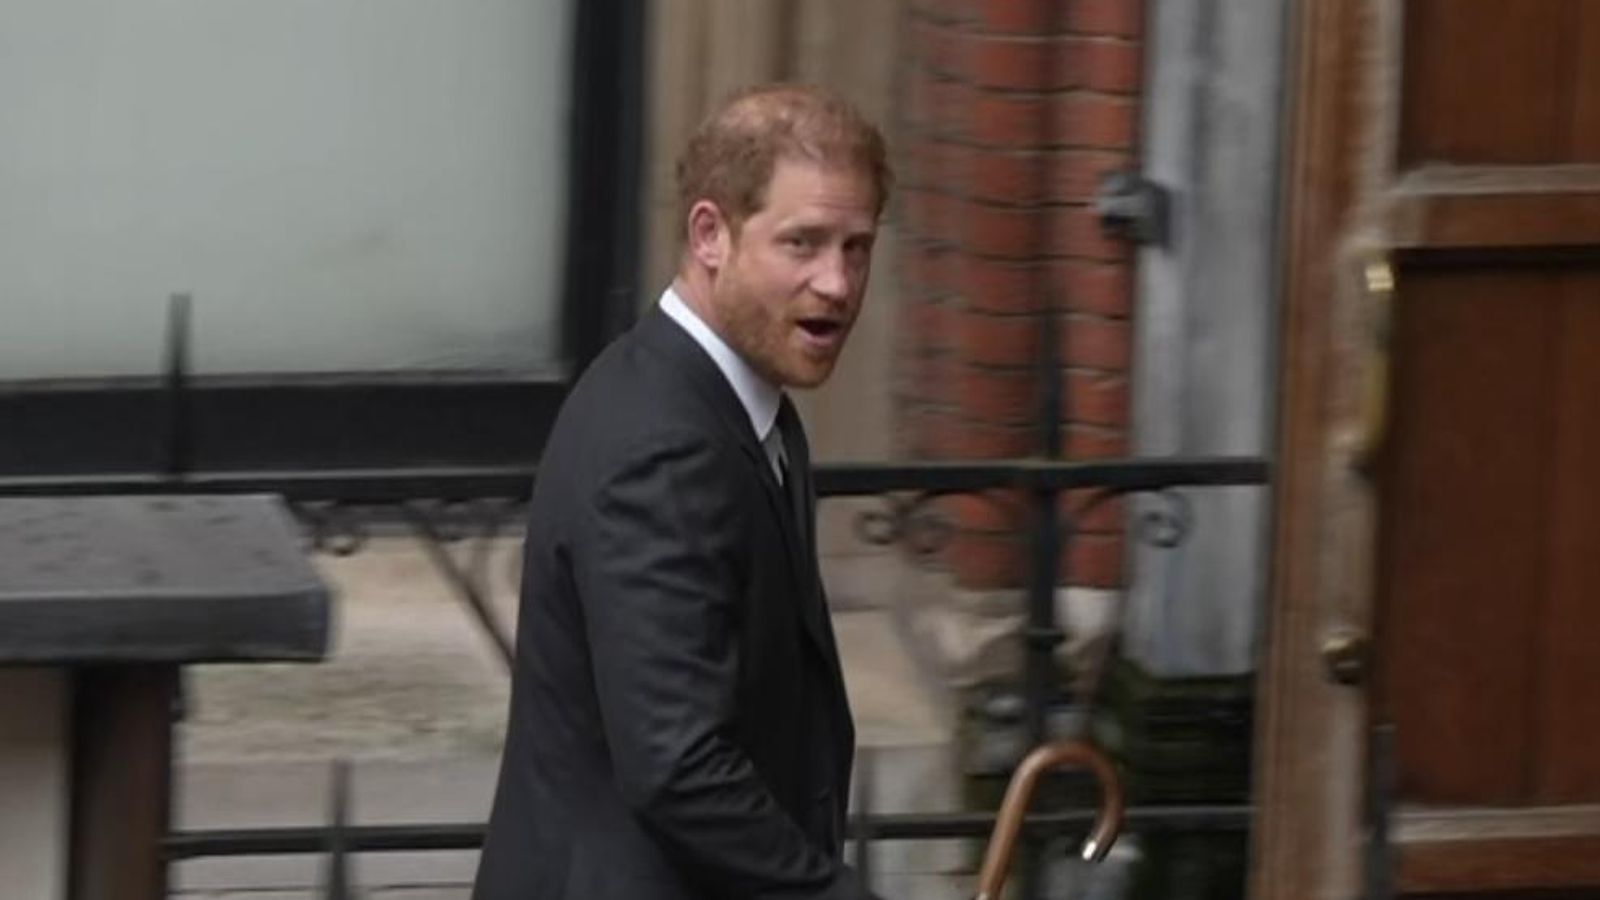 Prince Harry says Royal Family 'without doubt' withheld information from him on phone hacking